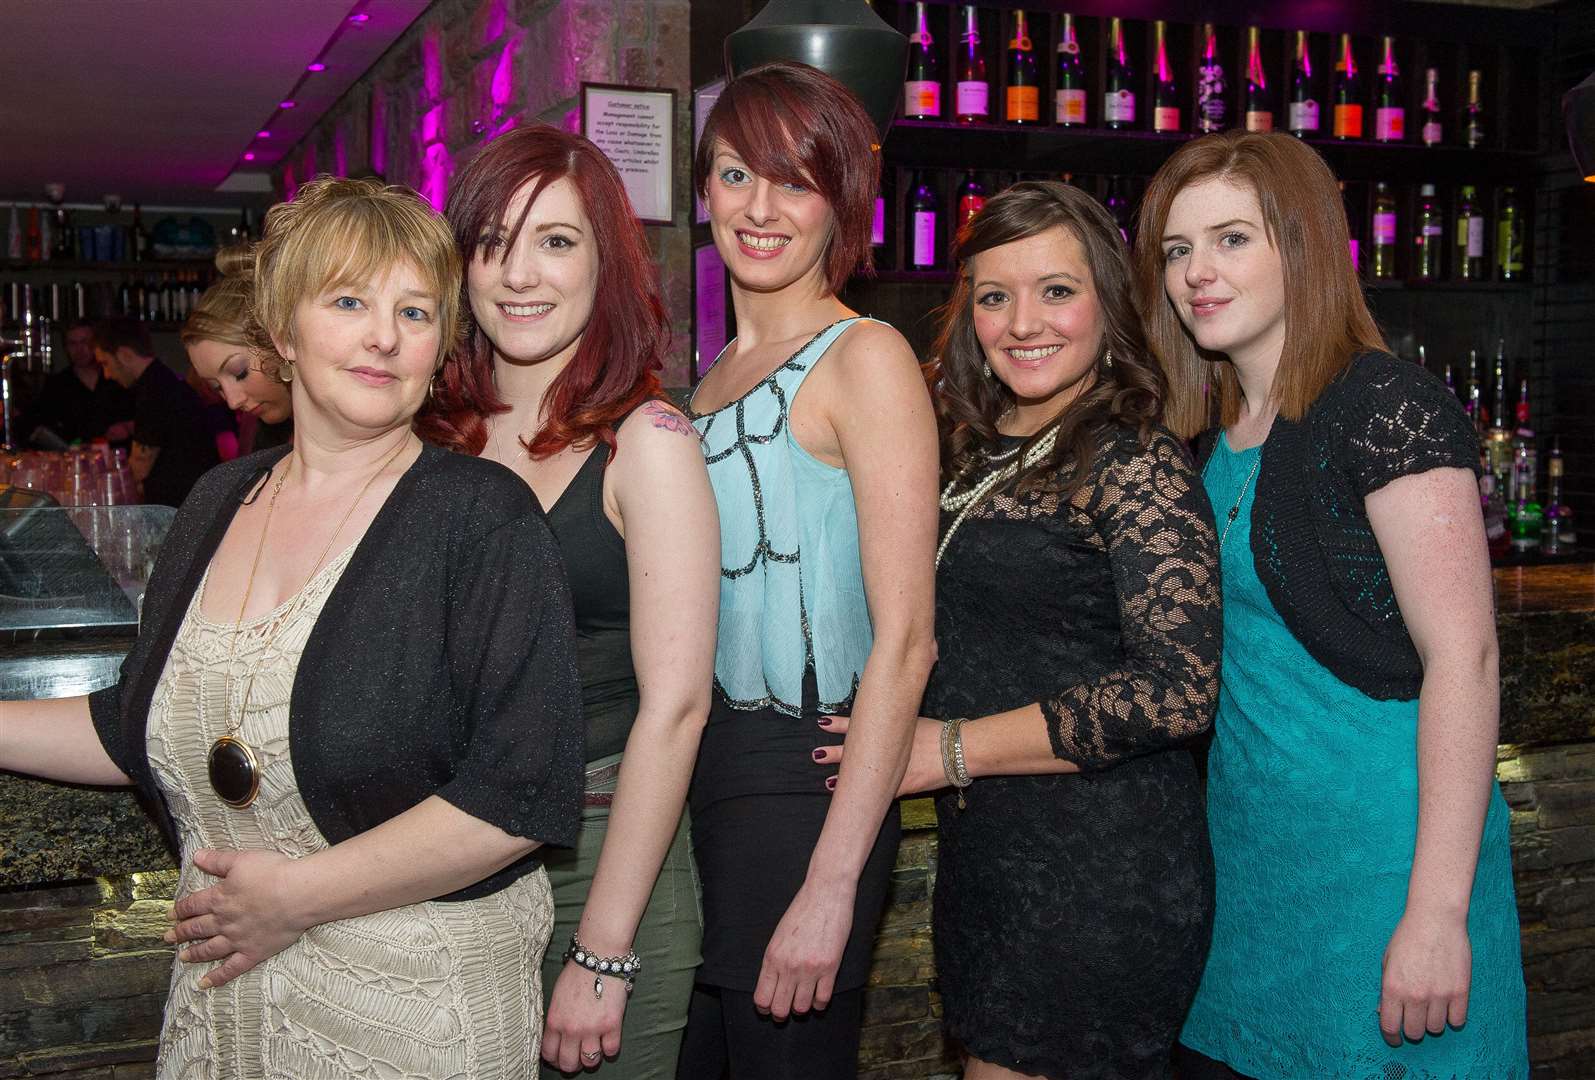 City Seen 12JAN 2013..The Mayfield Lodge girls on a night out int the Den...Picture: Callum Mackay. Image No. 020851.